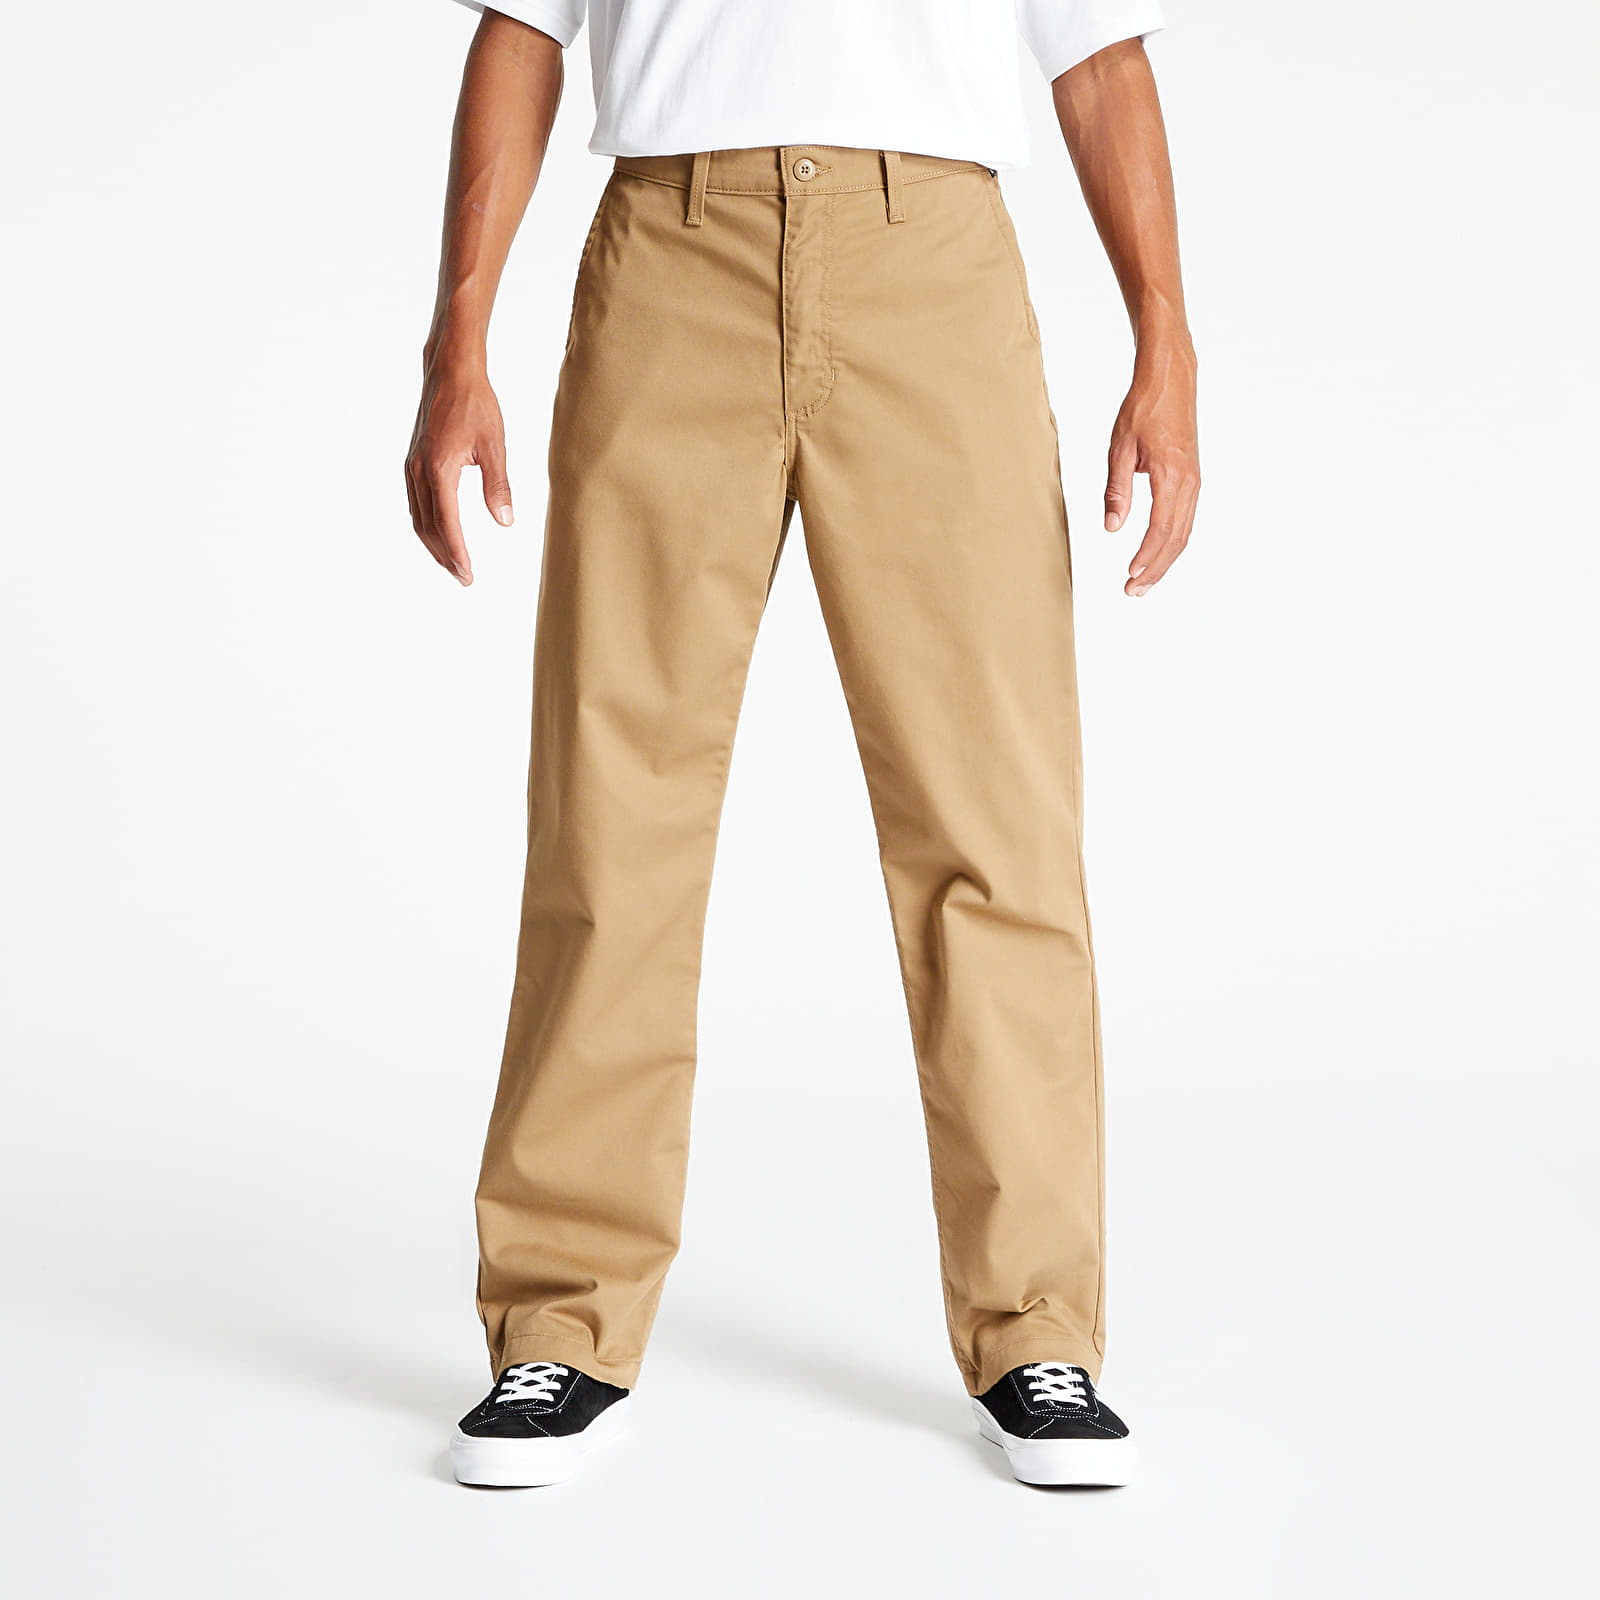 Džínsy a nohavice Vans Authentic Chino Loose Pant Dirt